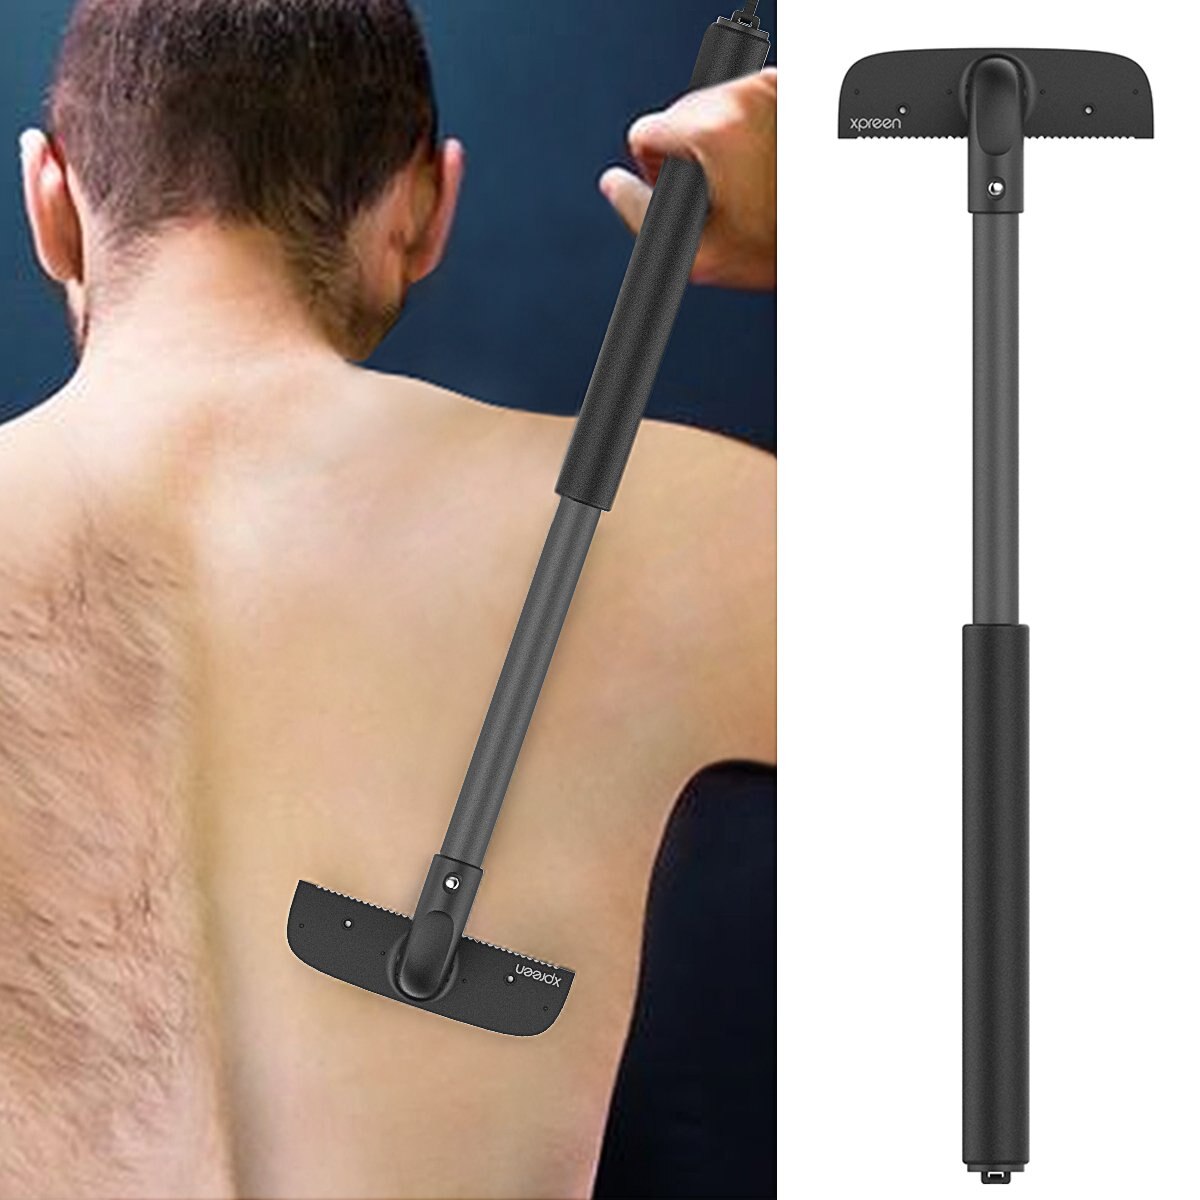 Back Shaver, Back Hair Removal And Body Shaver 2 Replacement, Man Groomer Back  Shaver With 18 Inch Stretch Ergonomic Handle, Painless Wet Or Dry Back  Shaver Blade For Men, J343 - Walmart.com